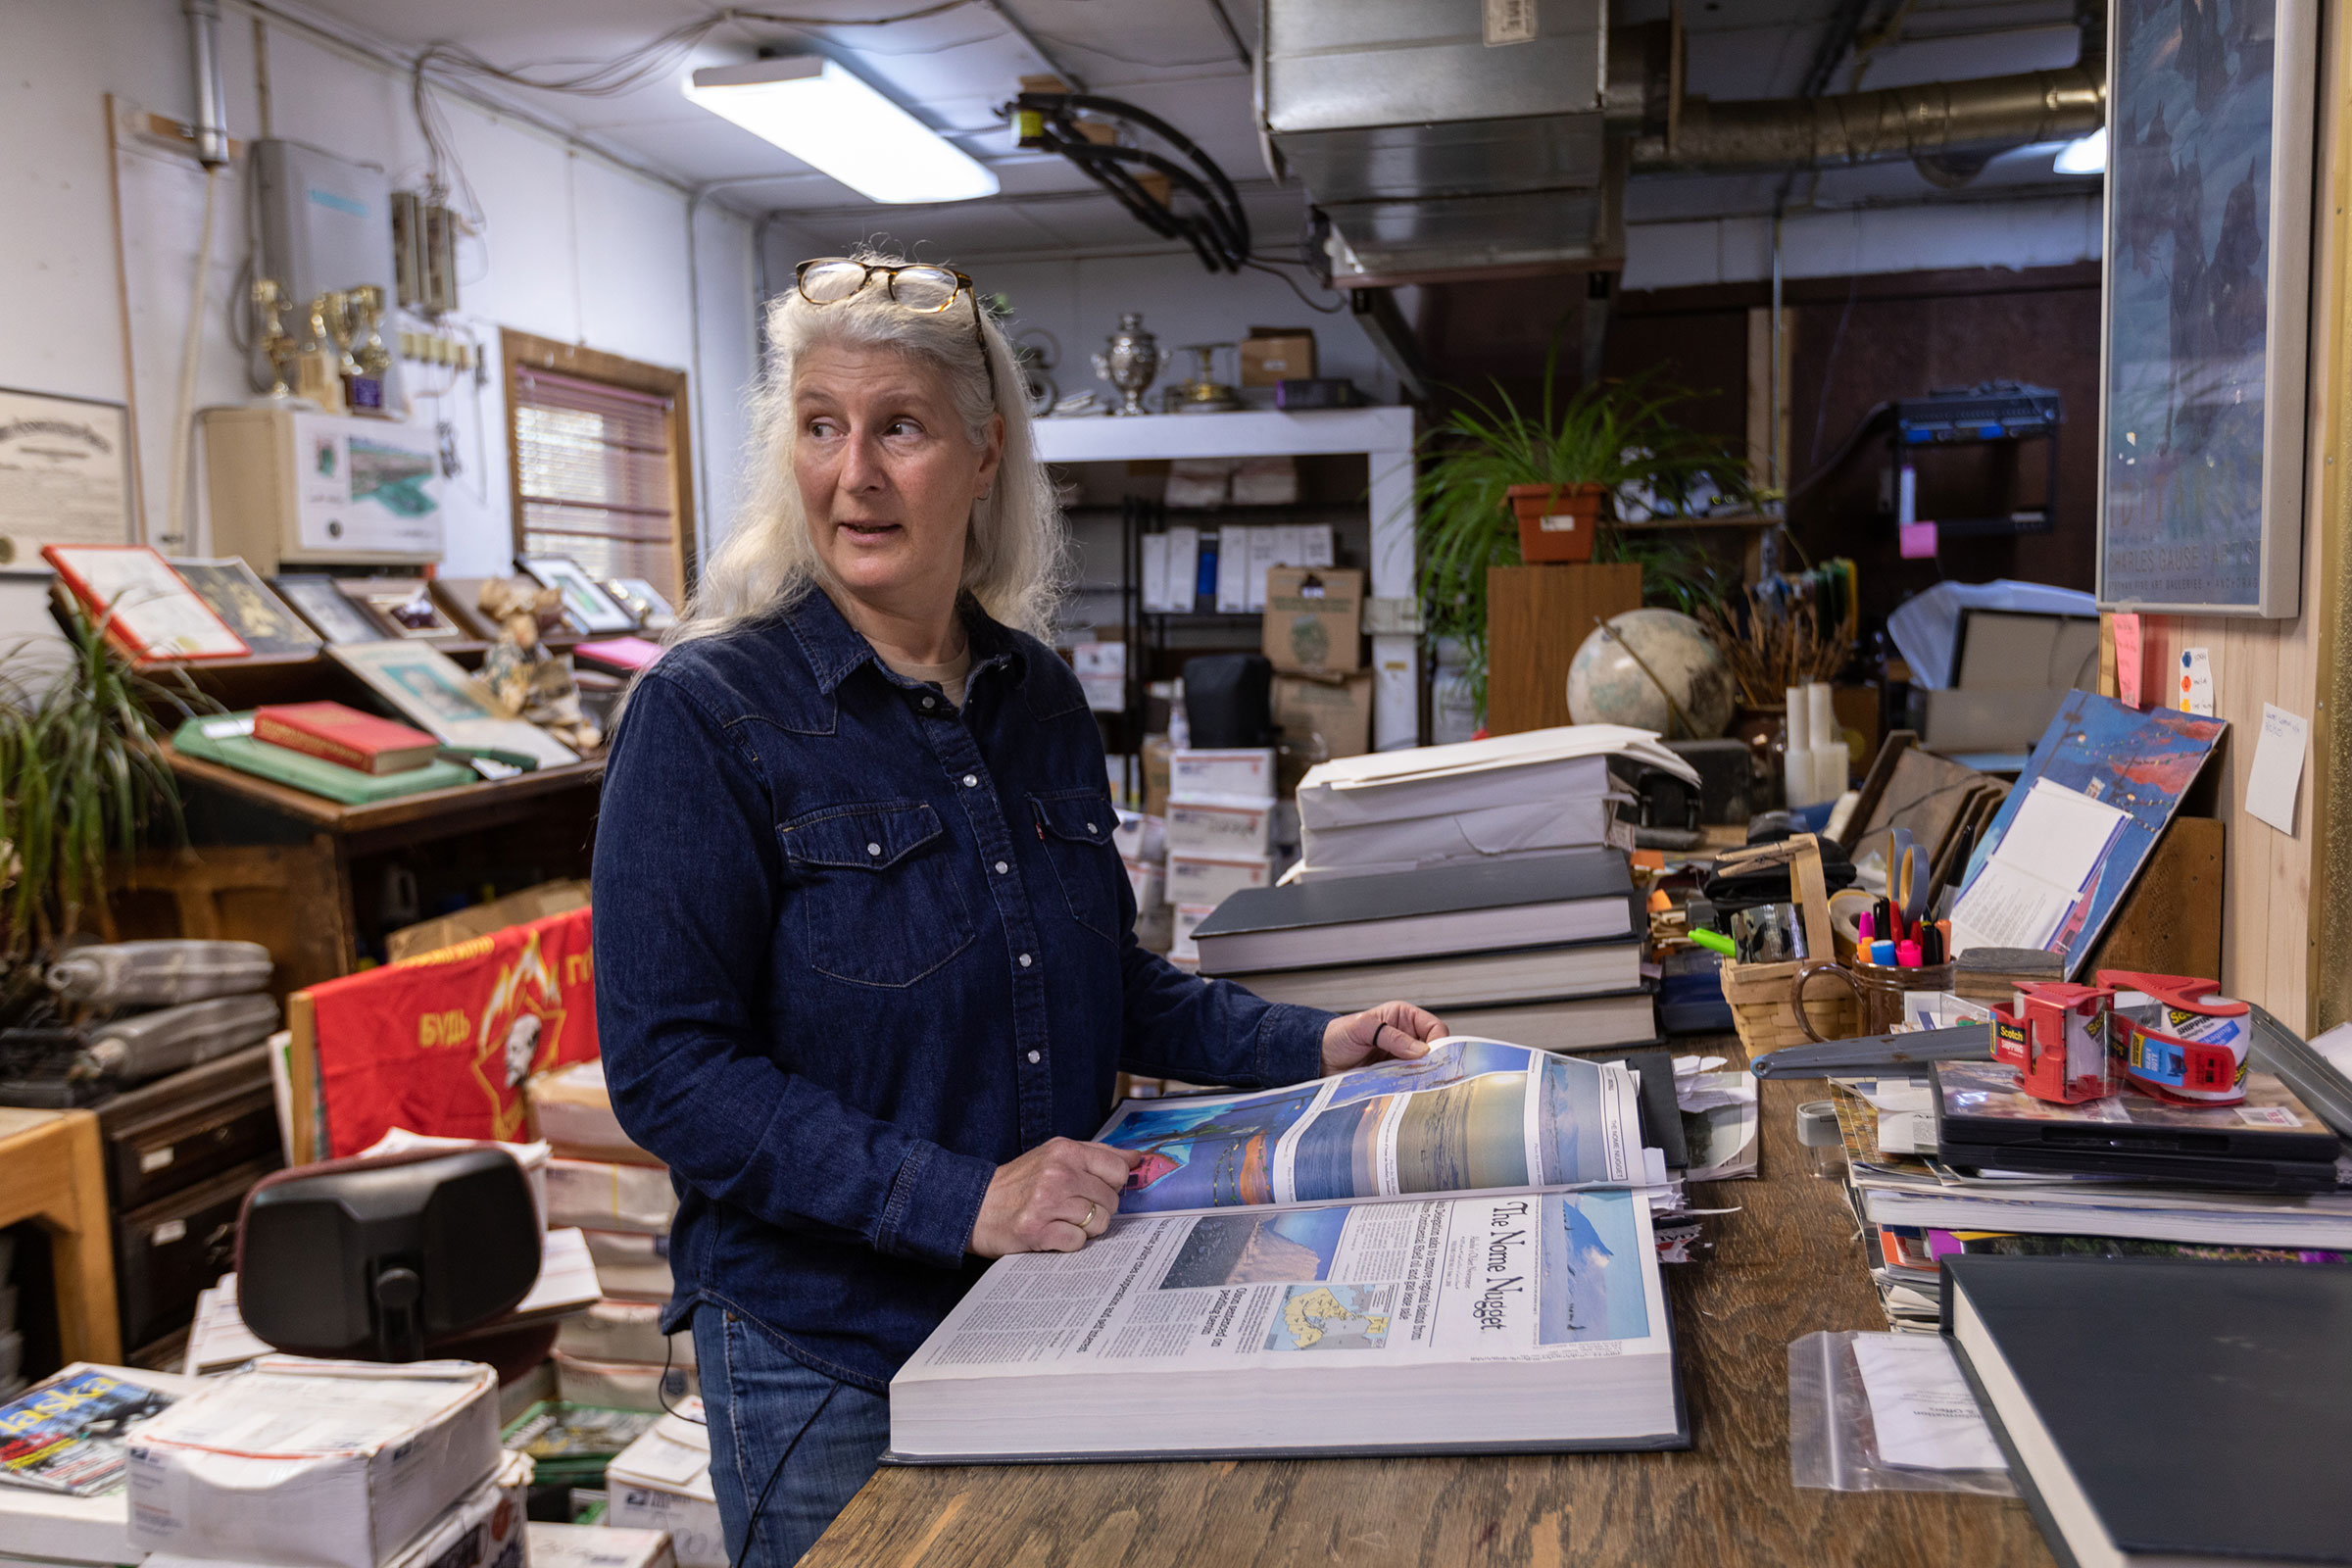 Diana Haecker, editor of the Nome Nugget, looks for climate stories in the archives of Alaska’s oldest newspaper. (Acacia Johnson for TIME)